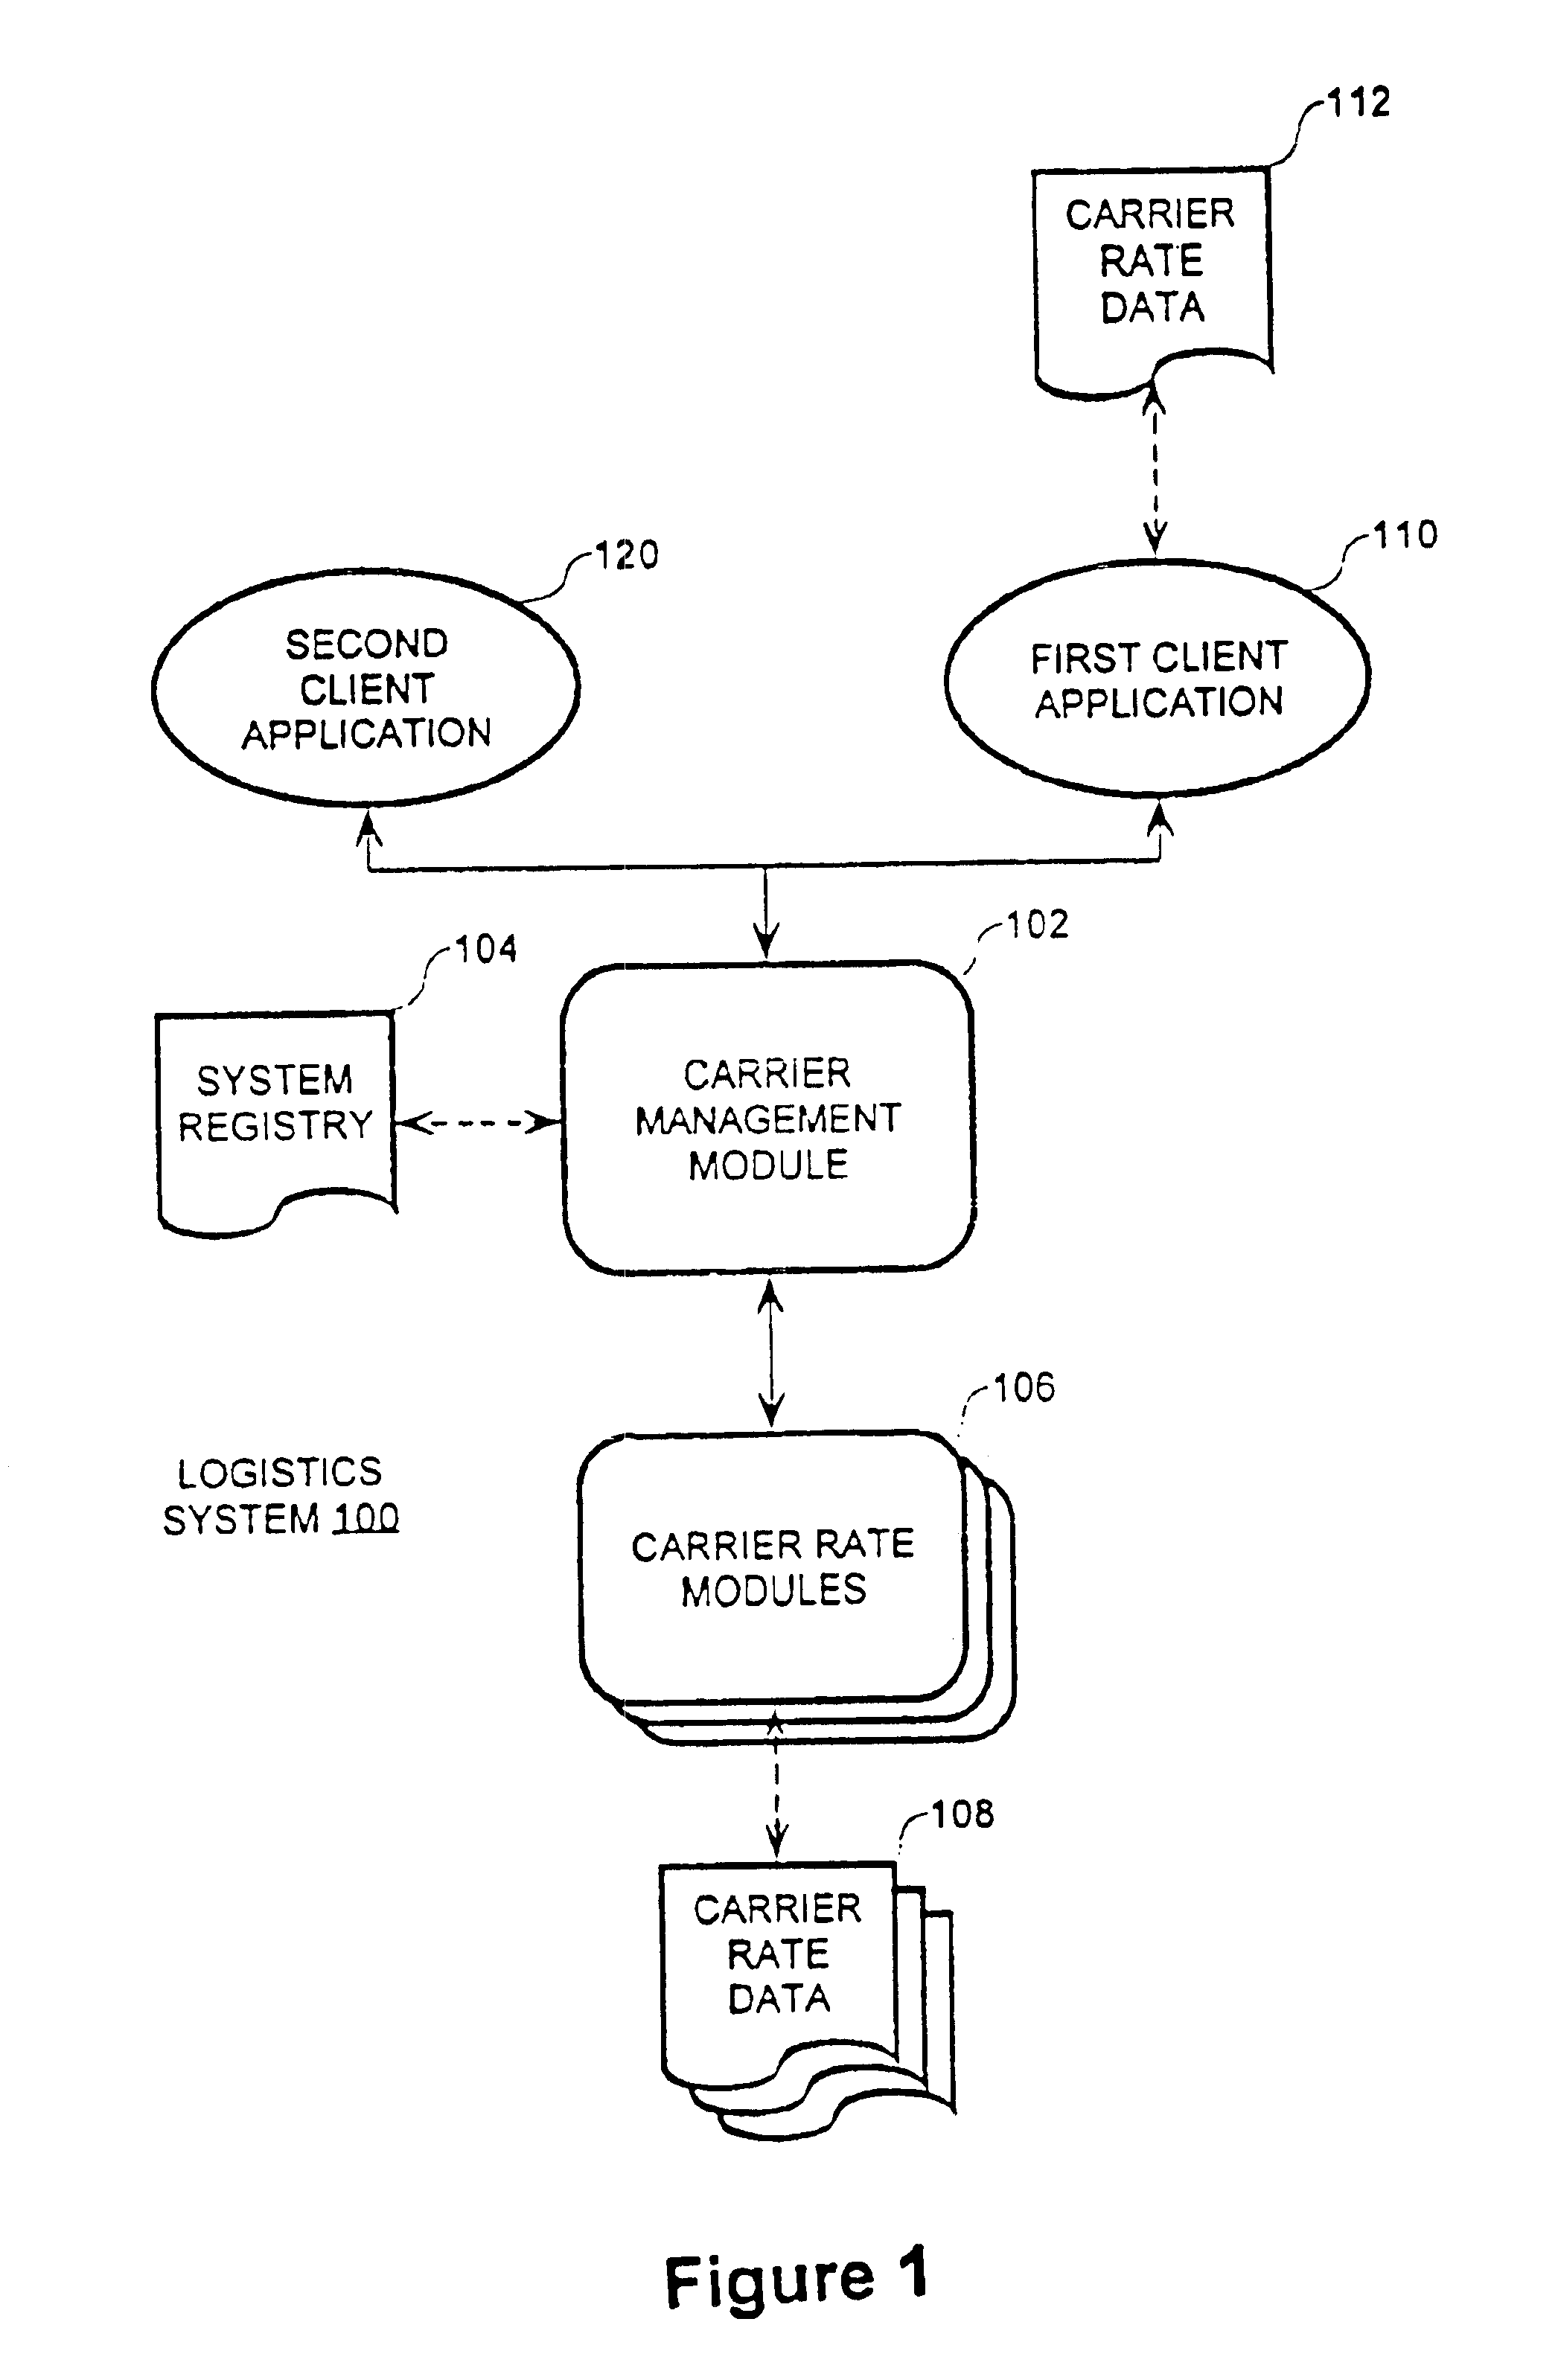 Event interface for a carrier manager system